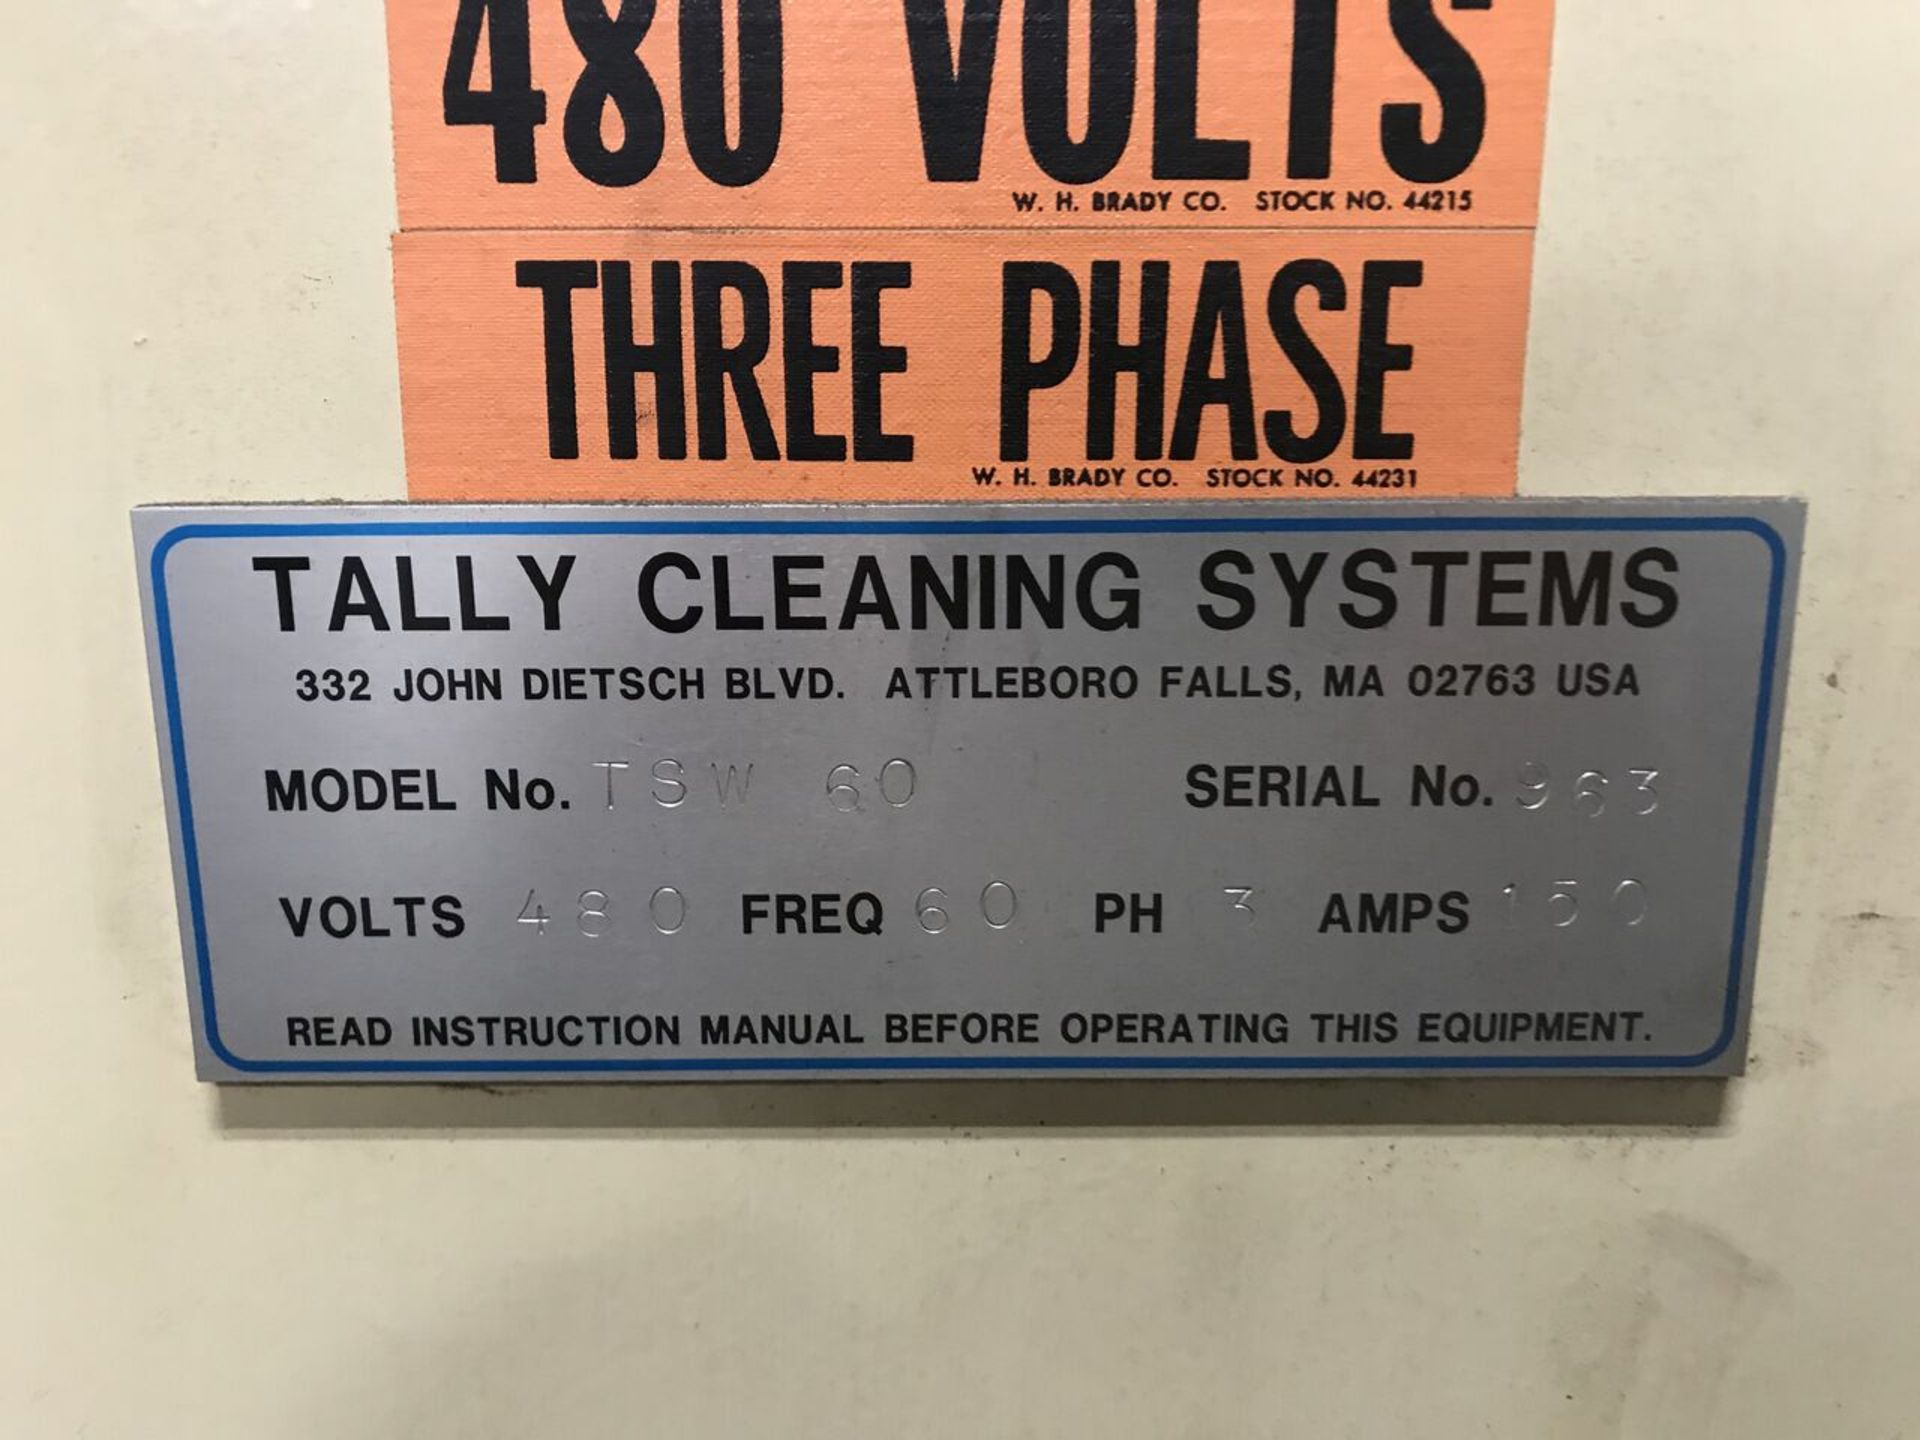 Tally Cleaning Turbo Spray Washer, Model # = TSW60, Serial # = 963, Volts = 480, Amps = 150 - Image 4 of 6